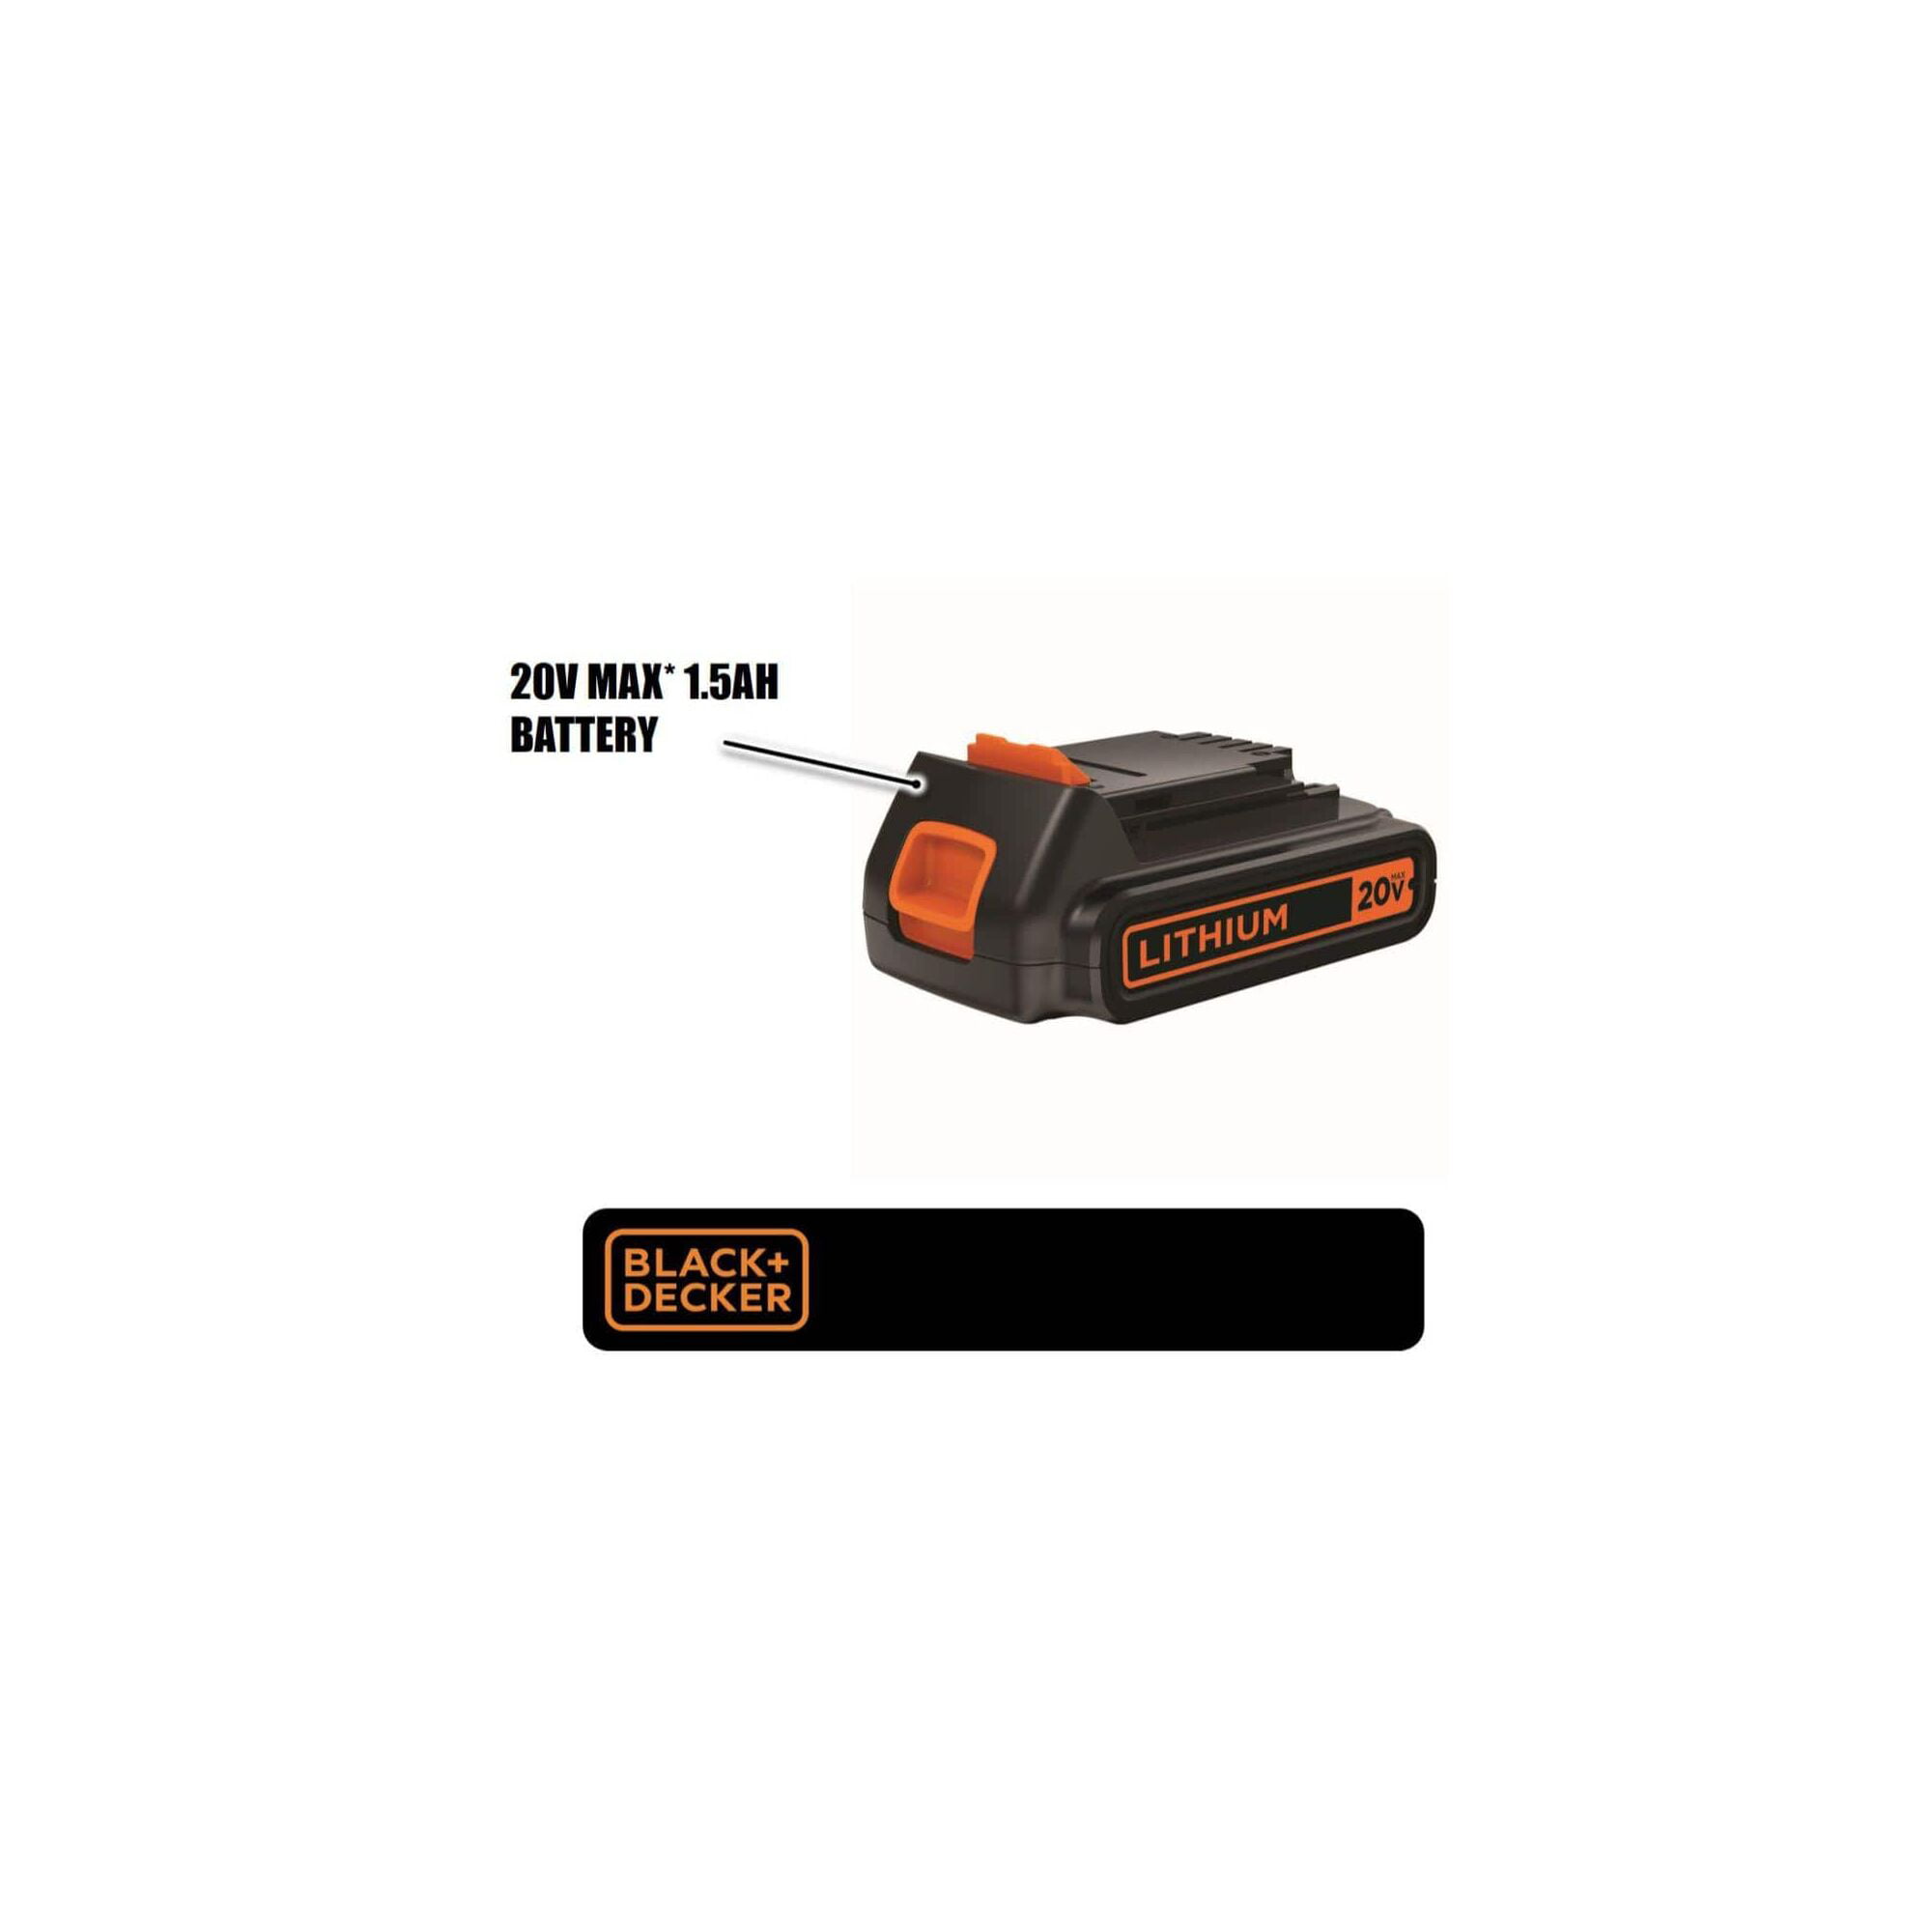 Black & Decker BCK279D2 20V MAX Brushed Lithium-Ion Cordless Axial